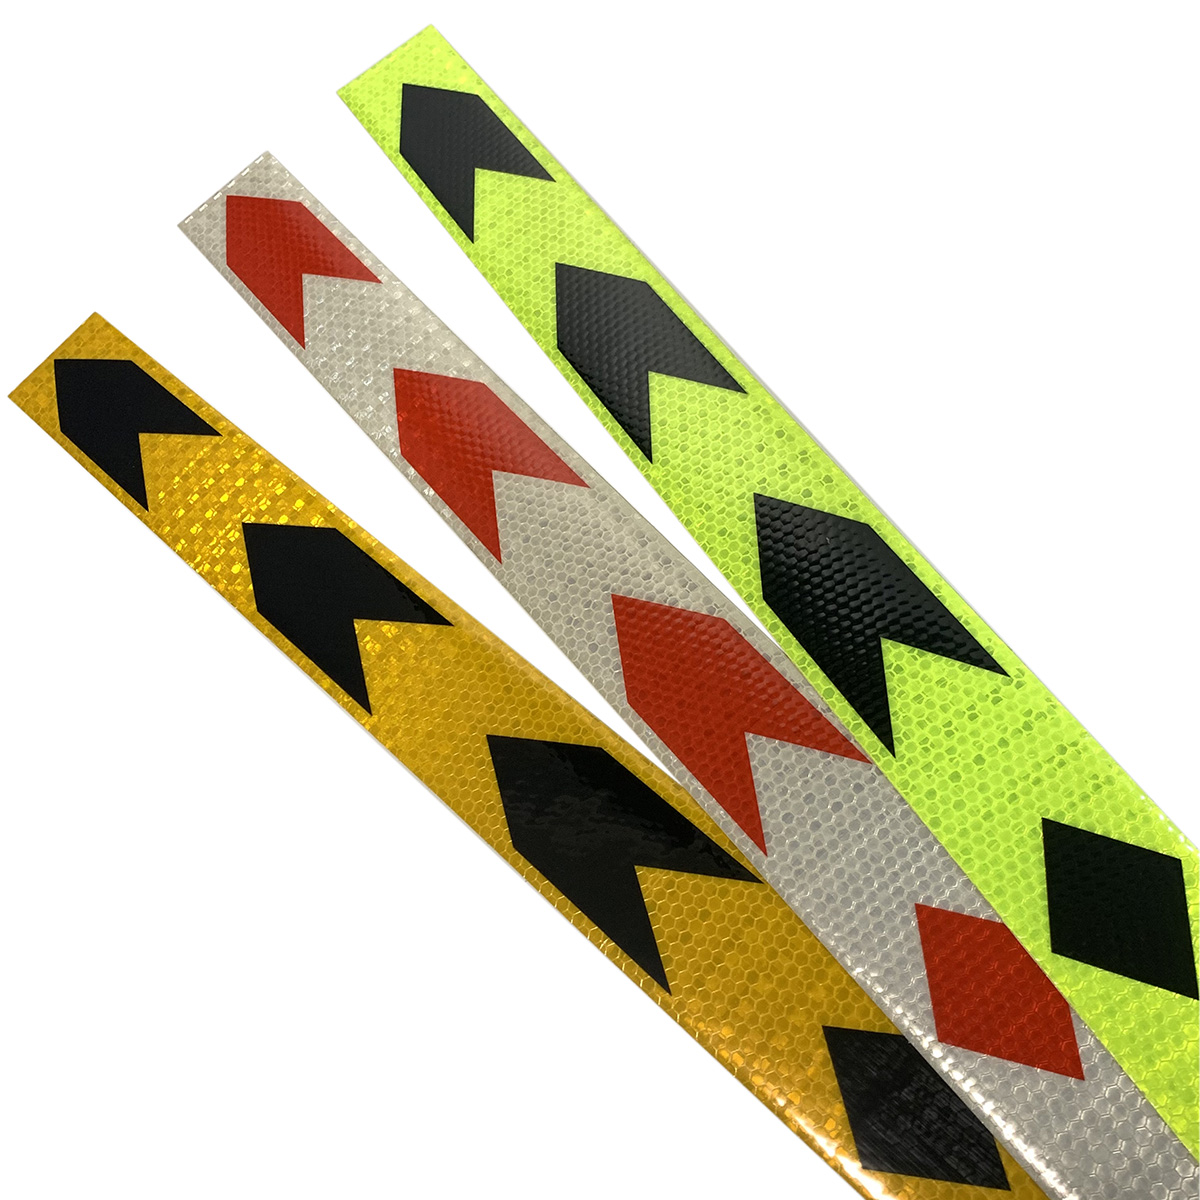 5*90cm PVC Honeycomb Arrow Safety Warning Reflective Stickers for Trucks